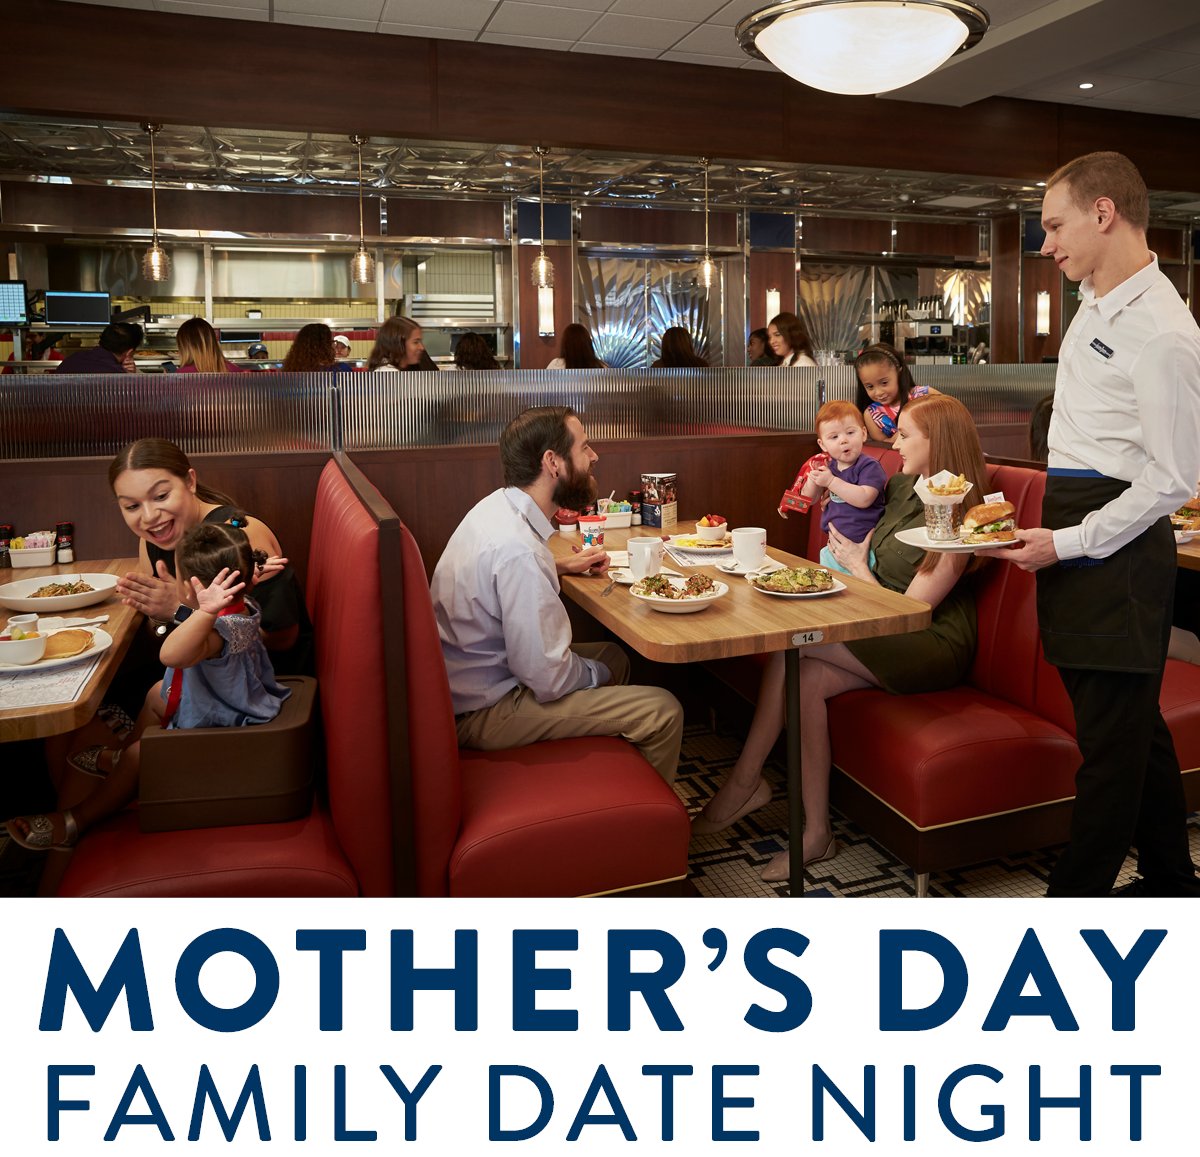 Let the kids be kids! Silver Diner is the perfect place for mom to spend Mother’s Day with the whole family. Join us after 4pm on Sunday, March 12th and enjoy complimentary instant photo with your family.